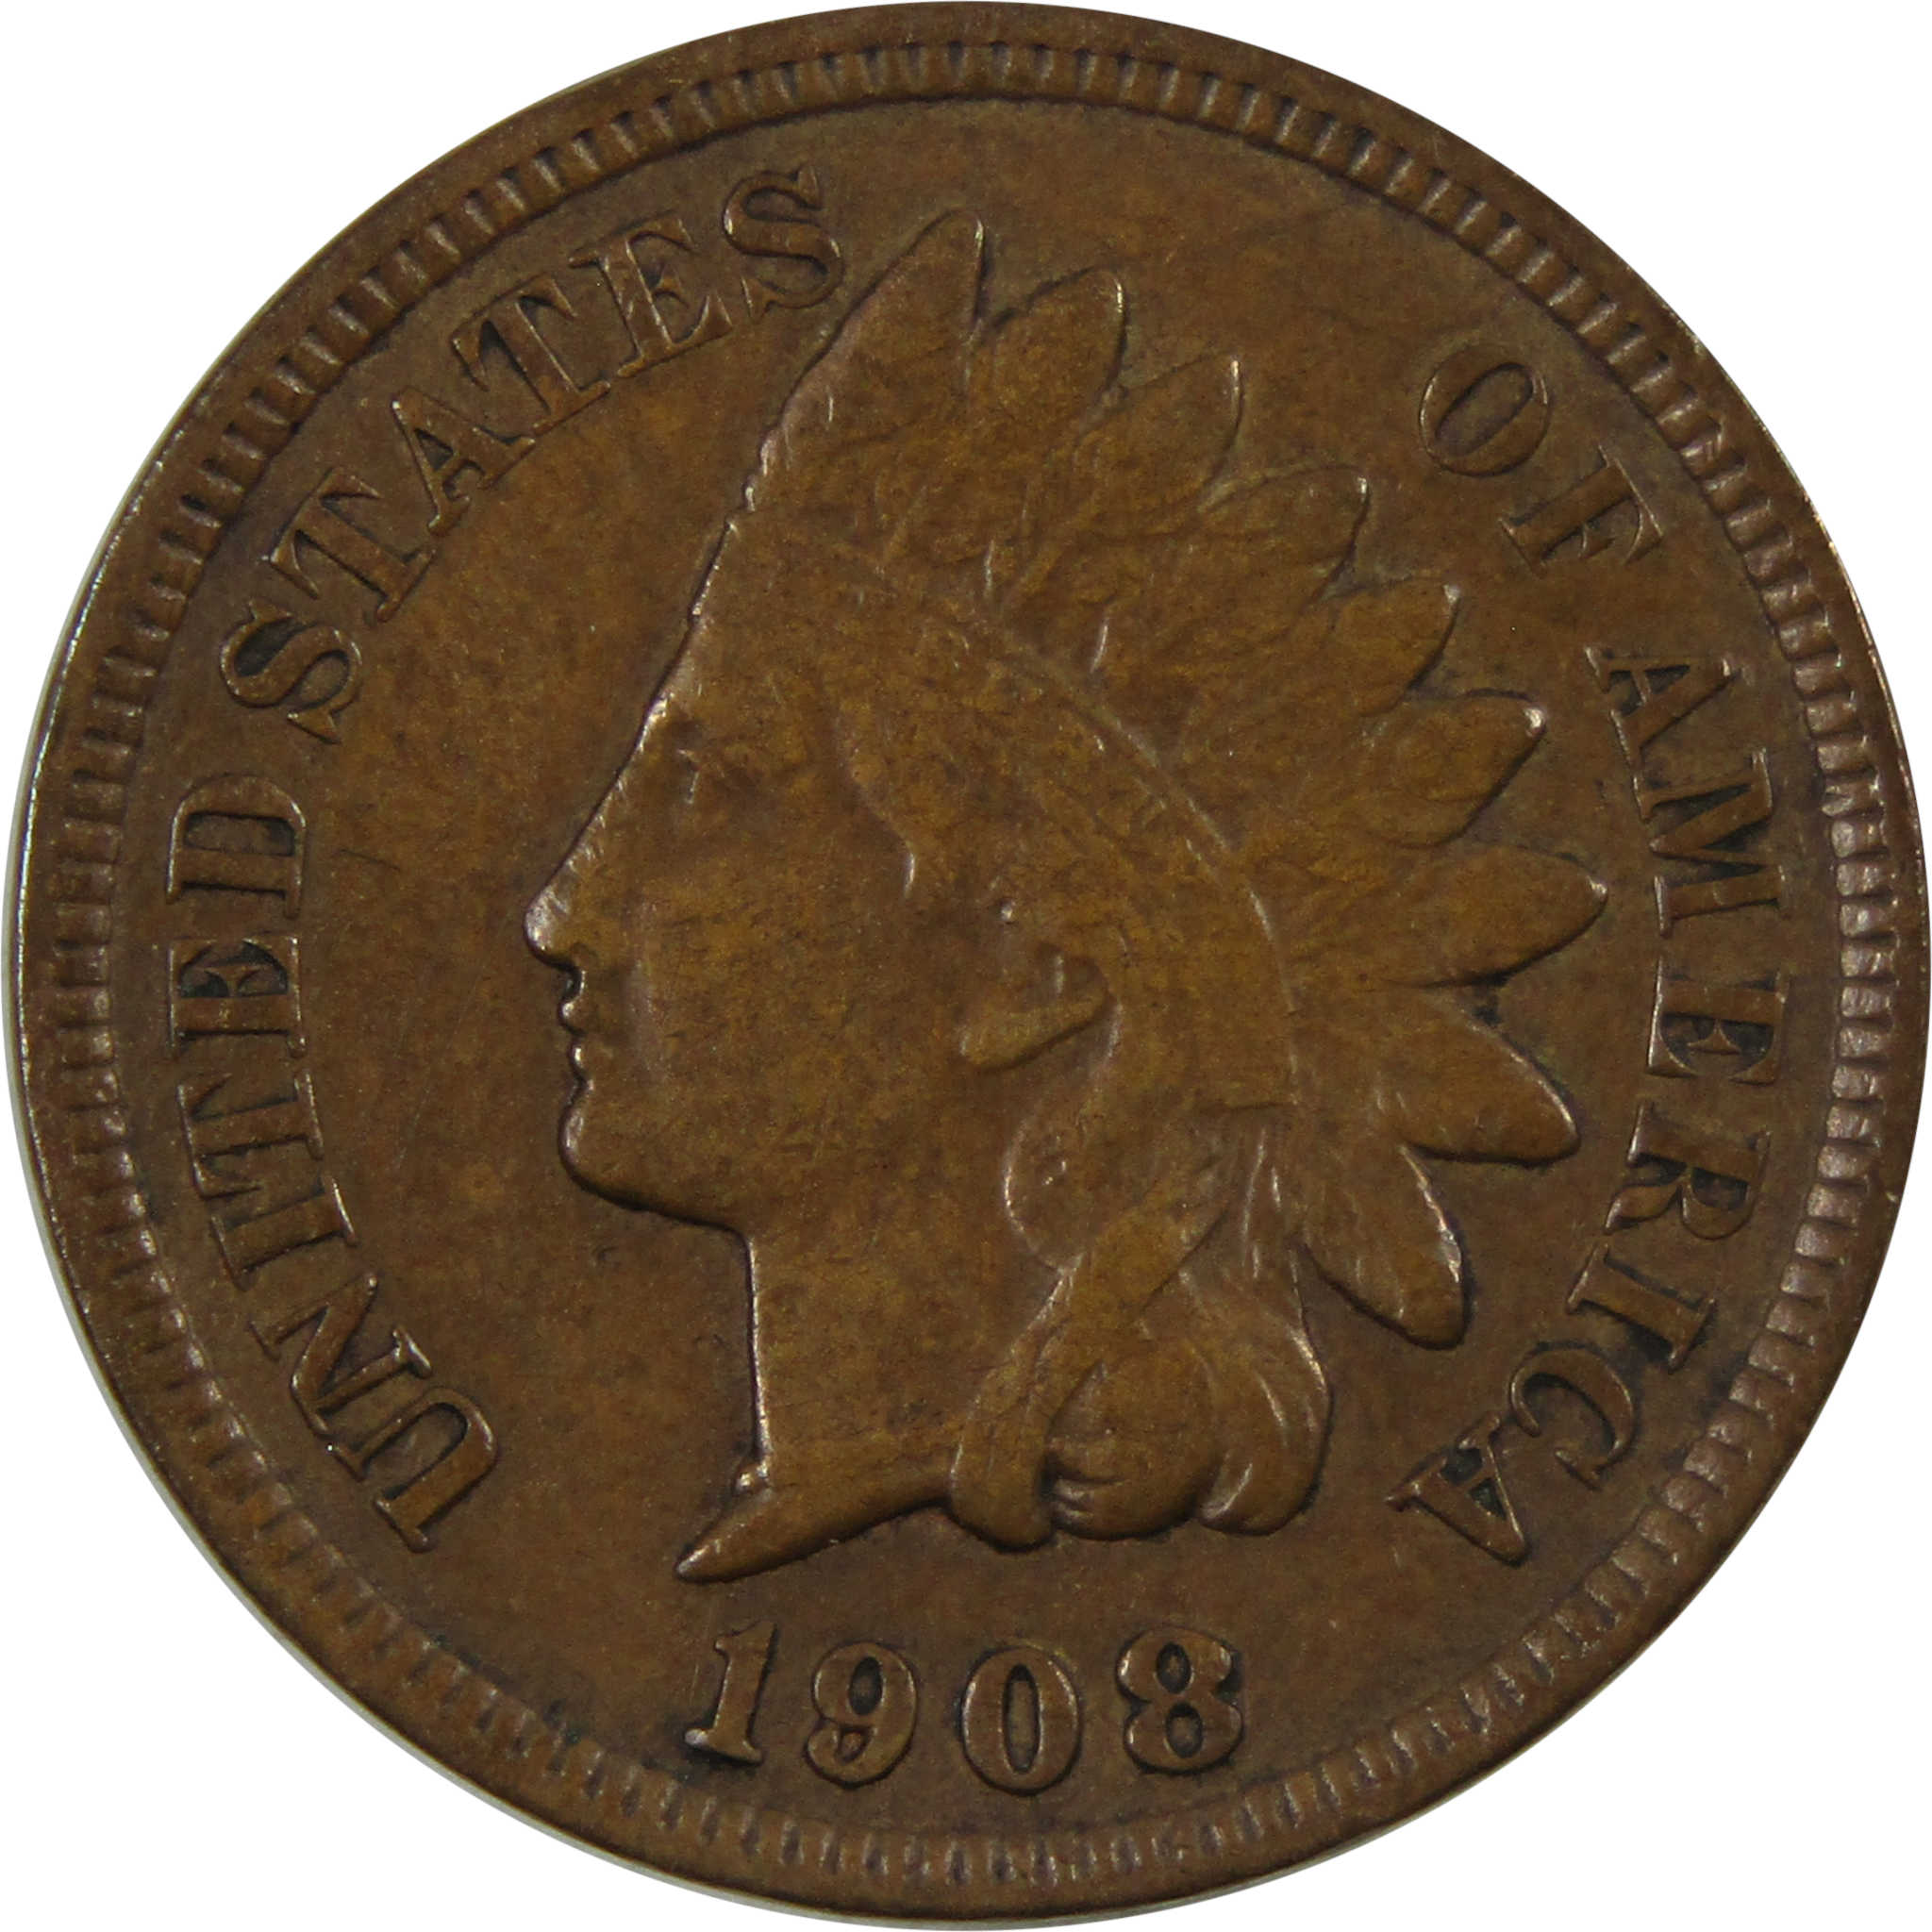 1908 S Indian Head Cent XF EF Extremely Fine Penny 1c Coin SKU:I4758